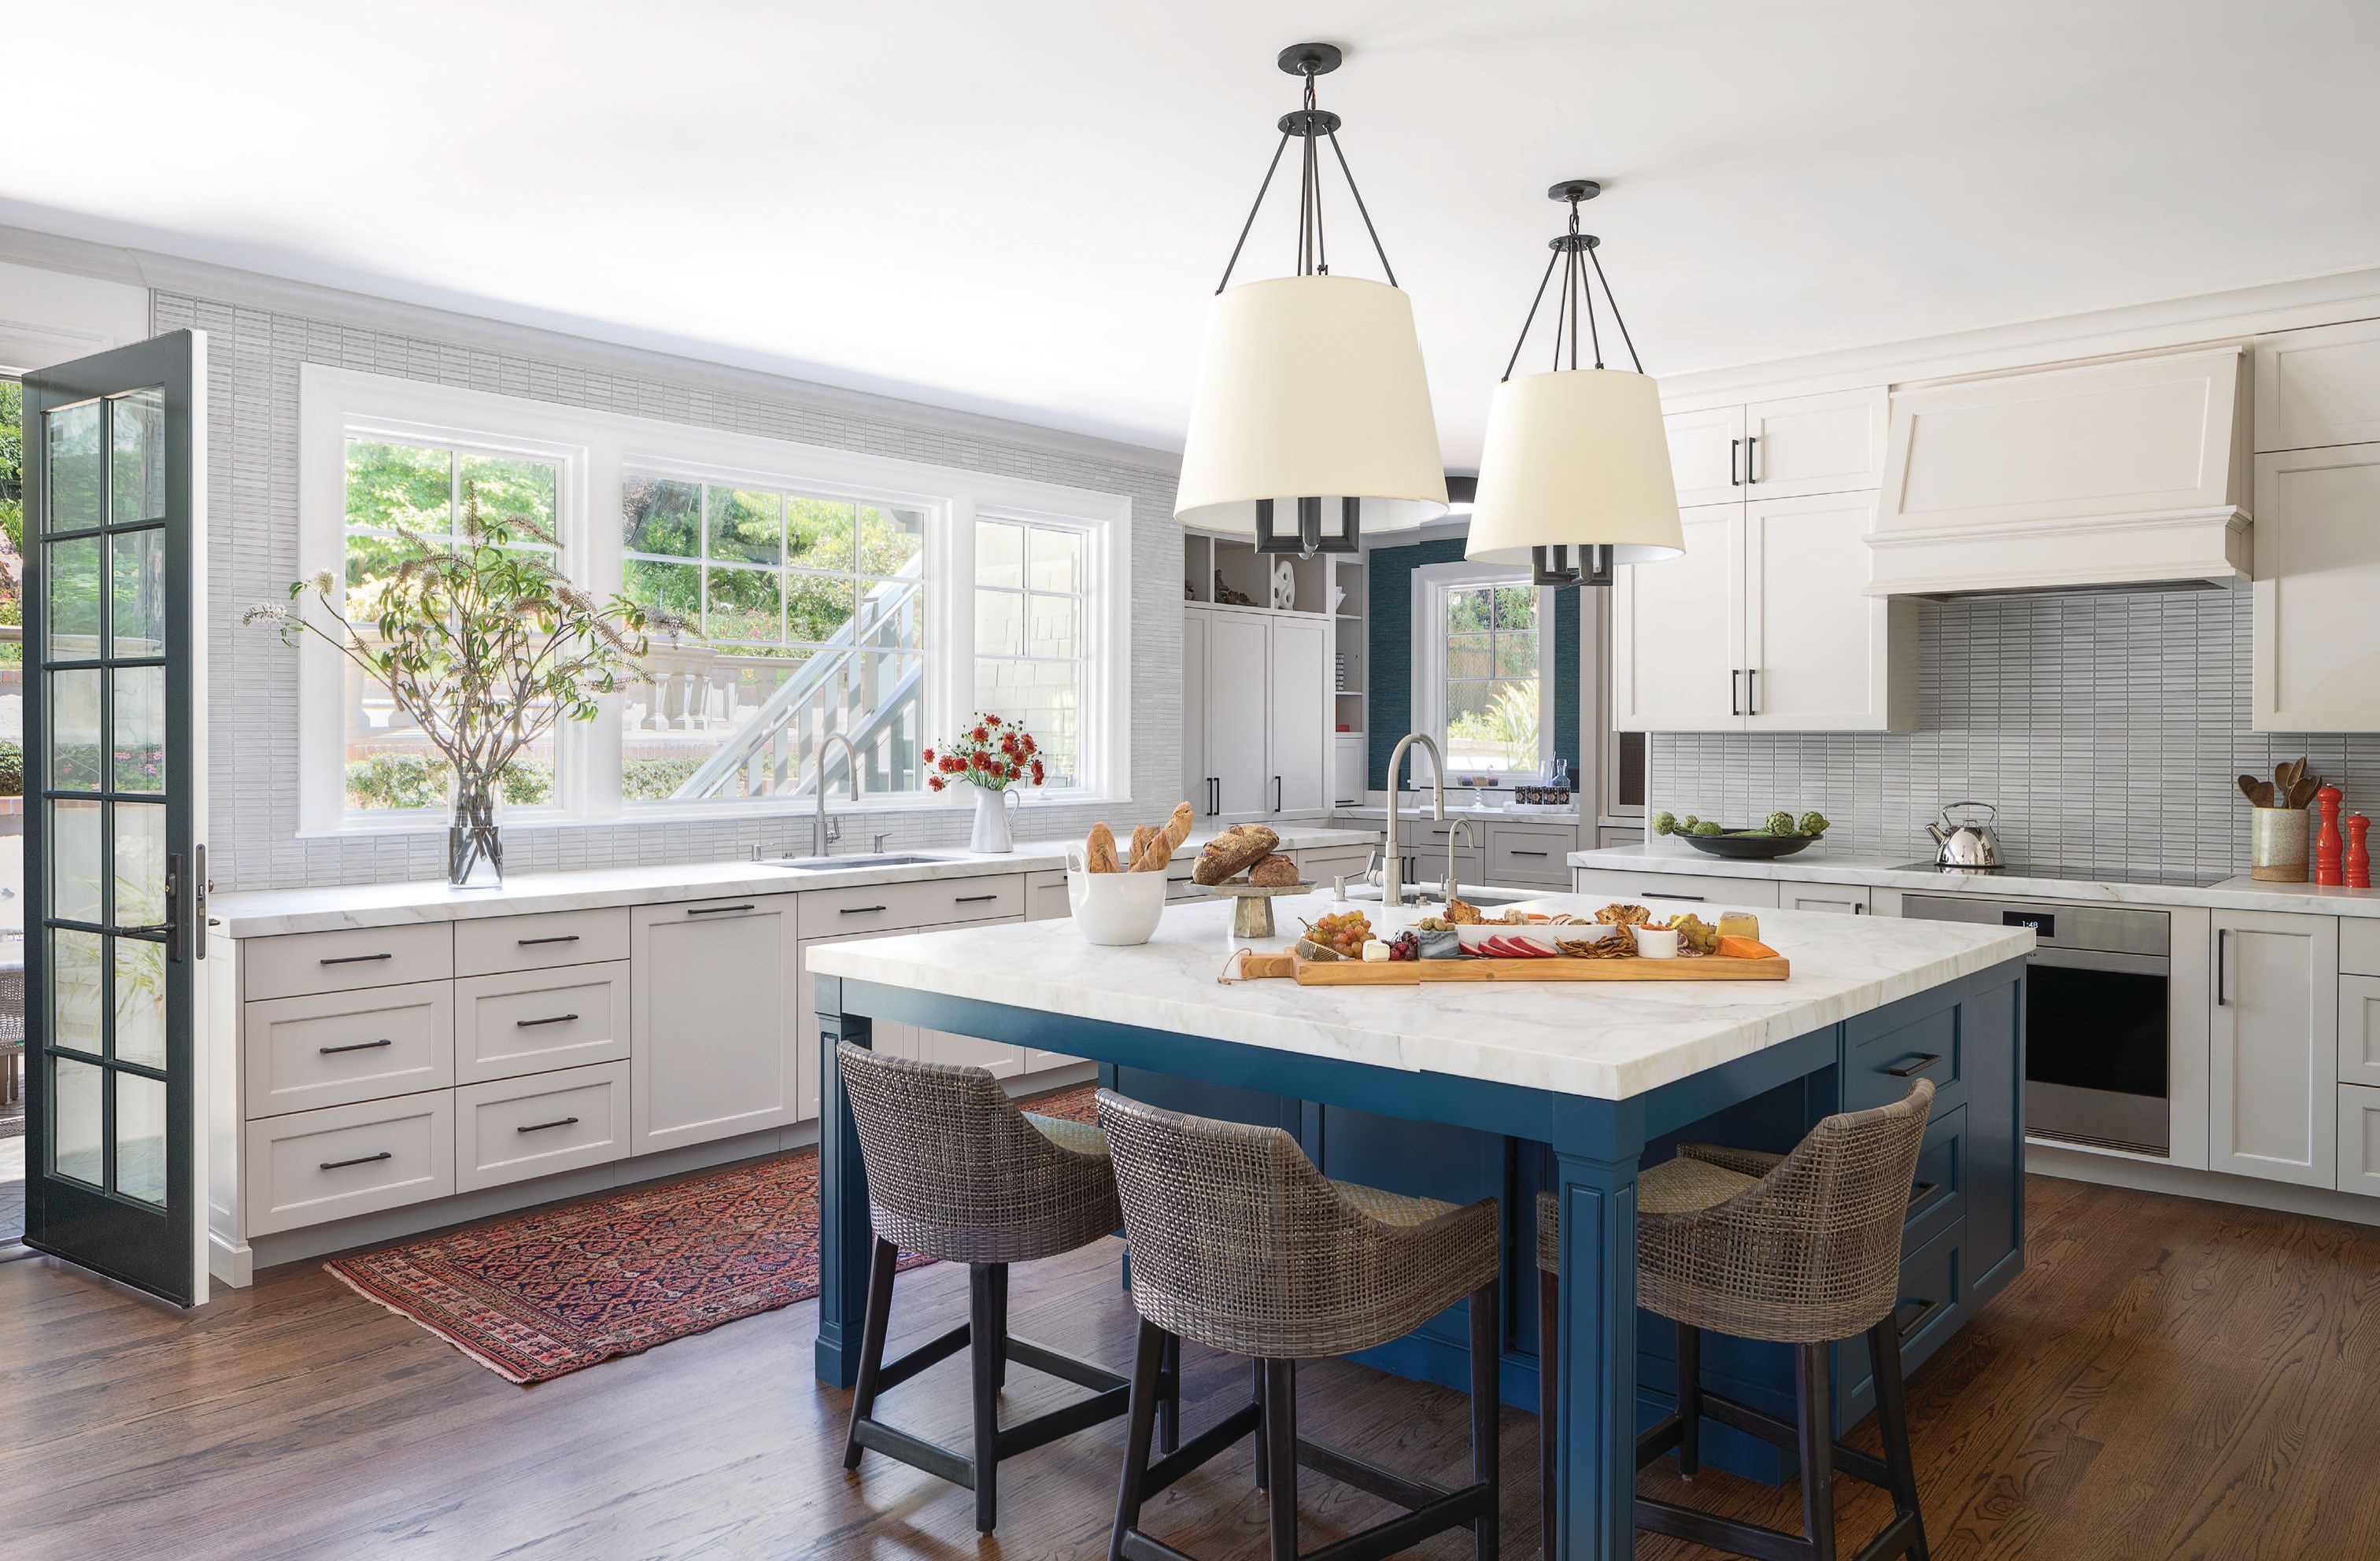 A mosaic backsplash from Ann Sacks, pendants from Visual Comfort and chairs from Palecek grace the bright and functional kitchen. PHOTOGRAPHED BY PAUL DYER AND TIM COY